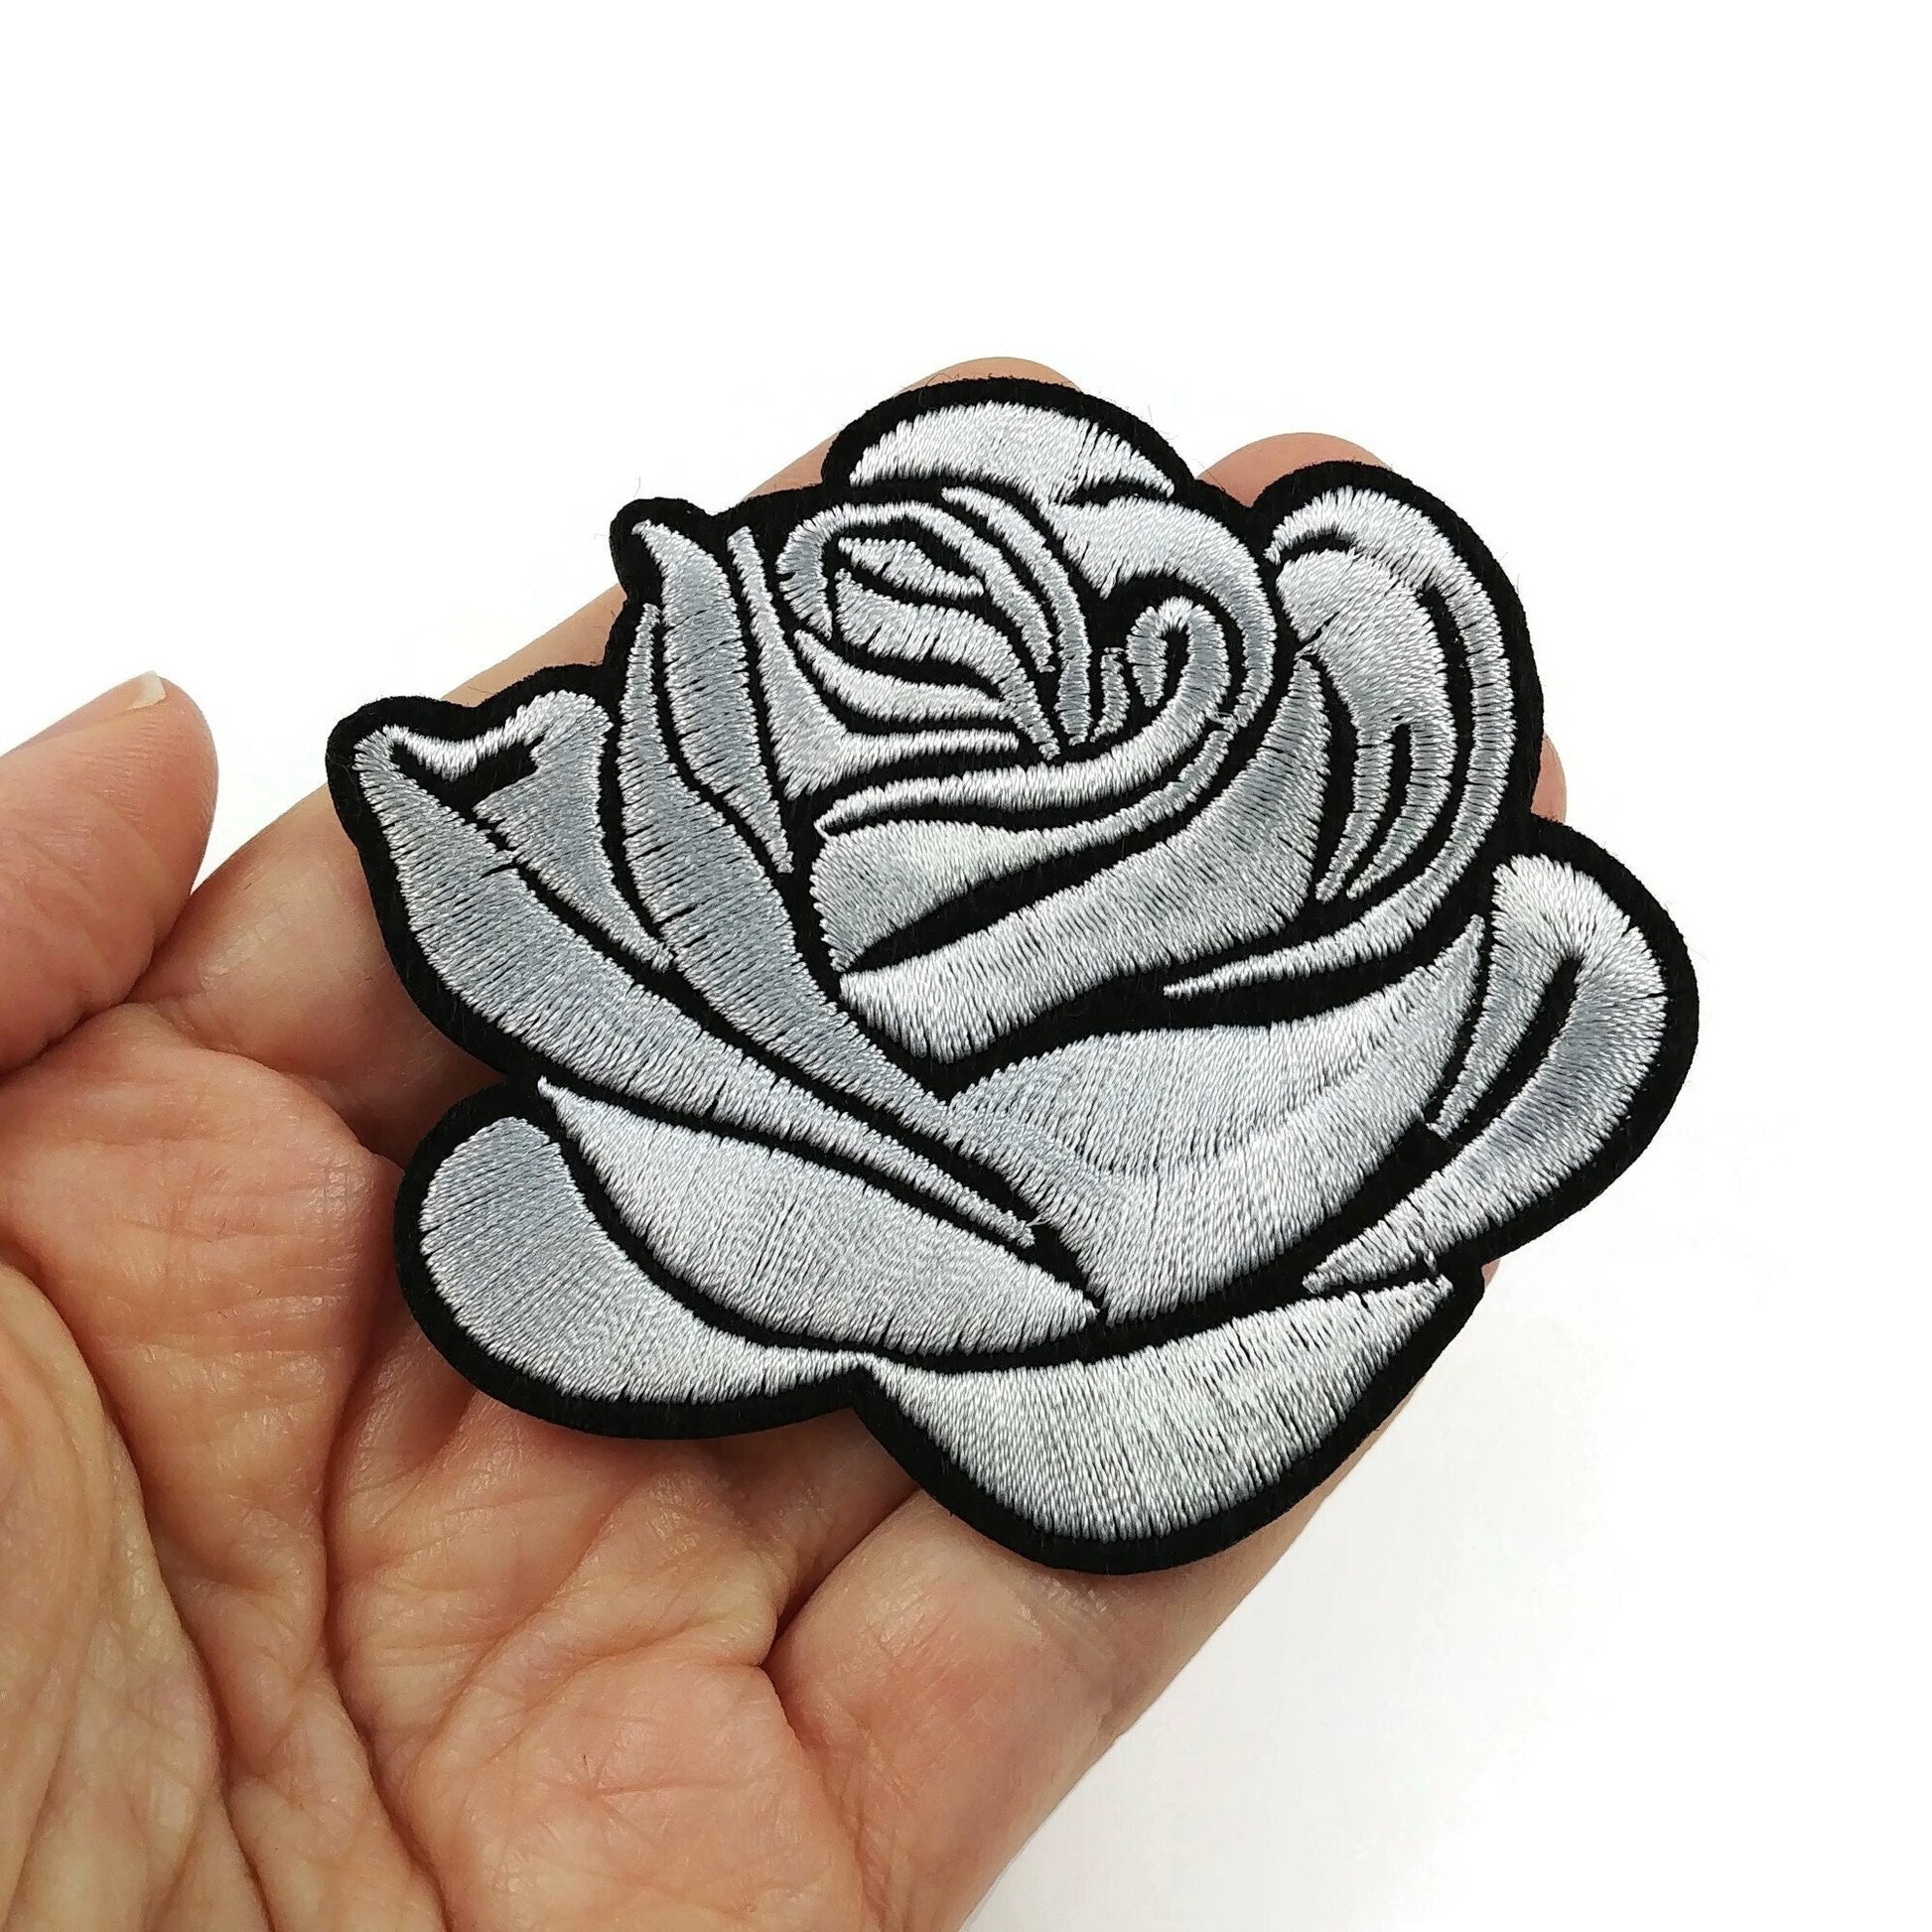 Large rose patch, Flower iron on patch, Embroidered patch, Big rose patch for jackets